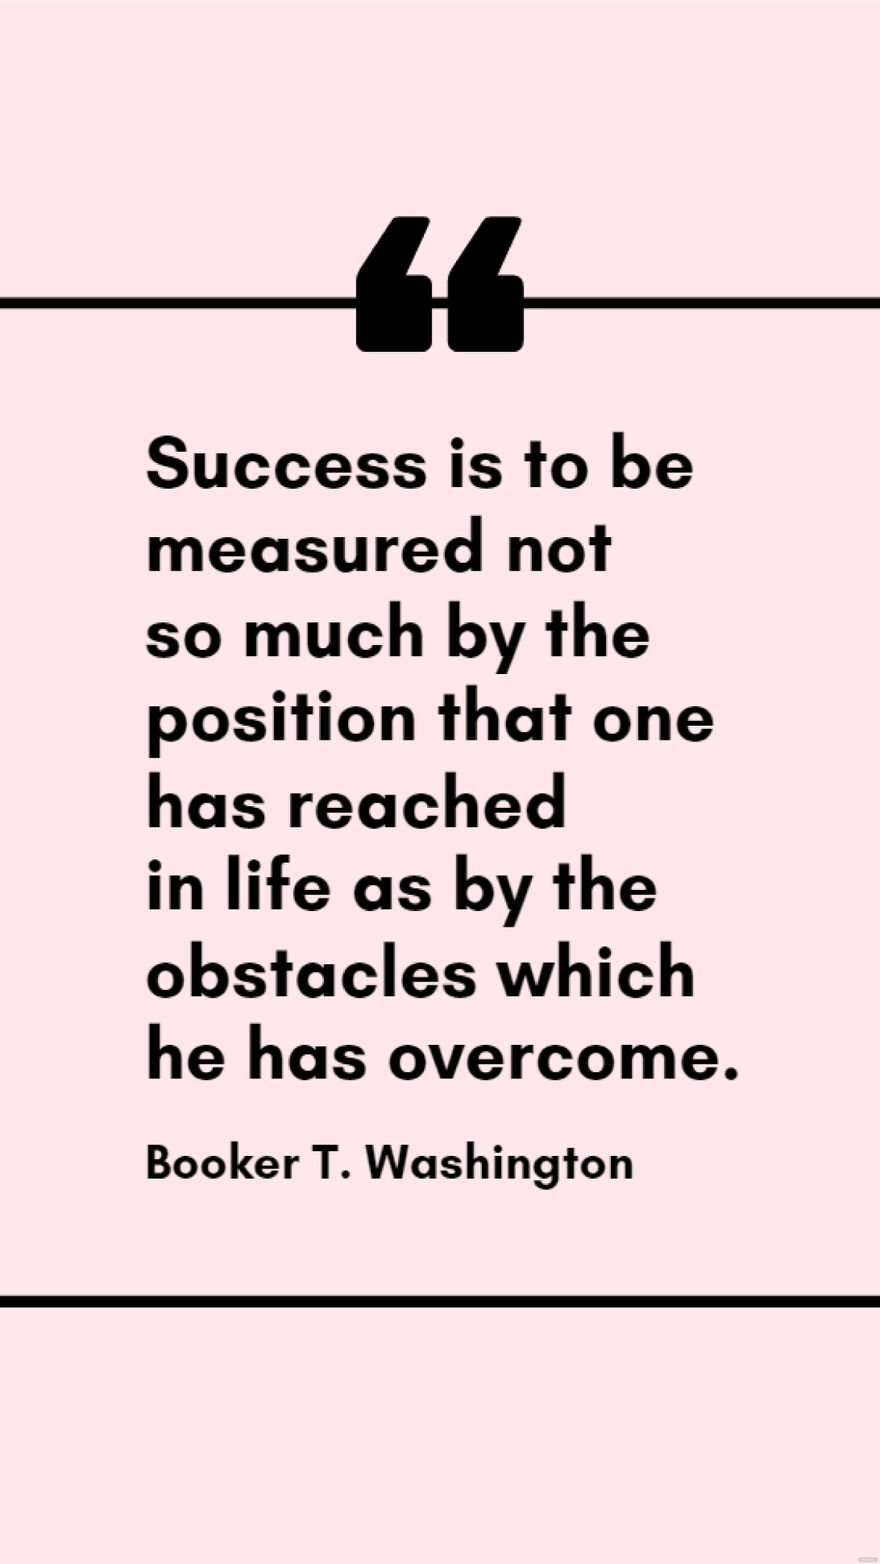 Booker T. Washington - Success is to be measured not so much by the position that one has reached in life as by the obstacles which he has overcome.